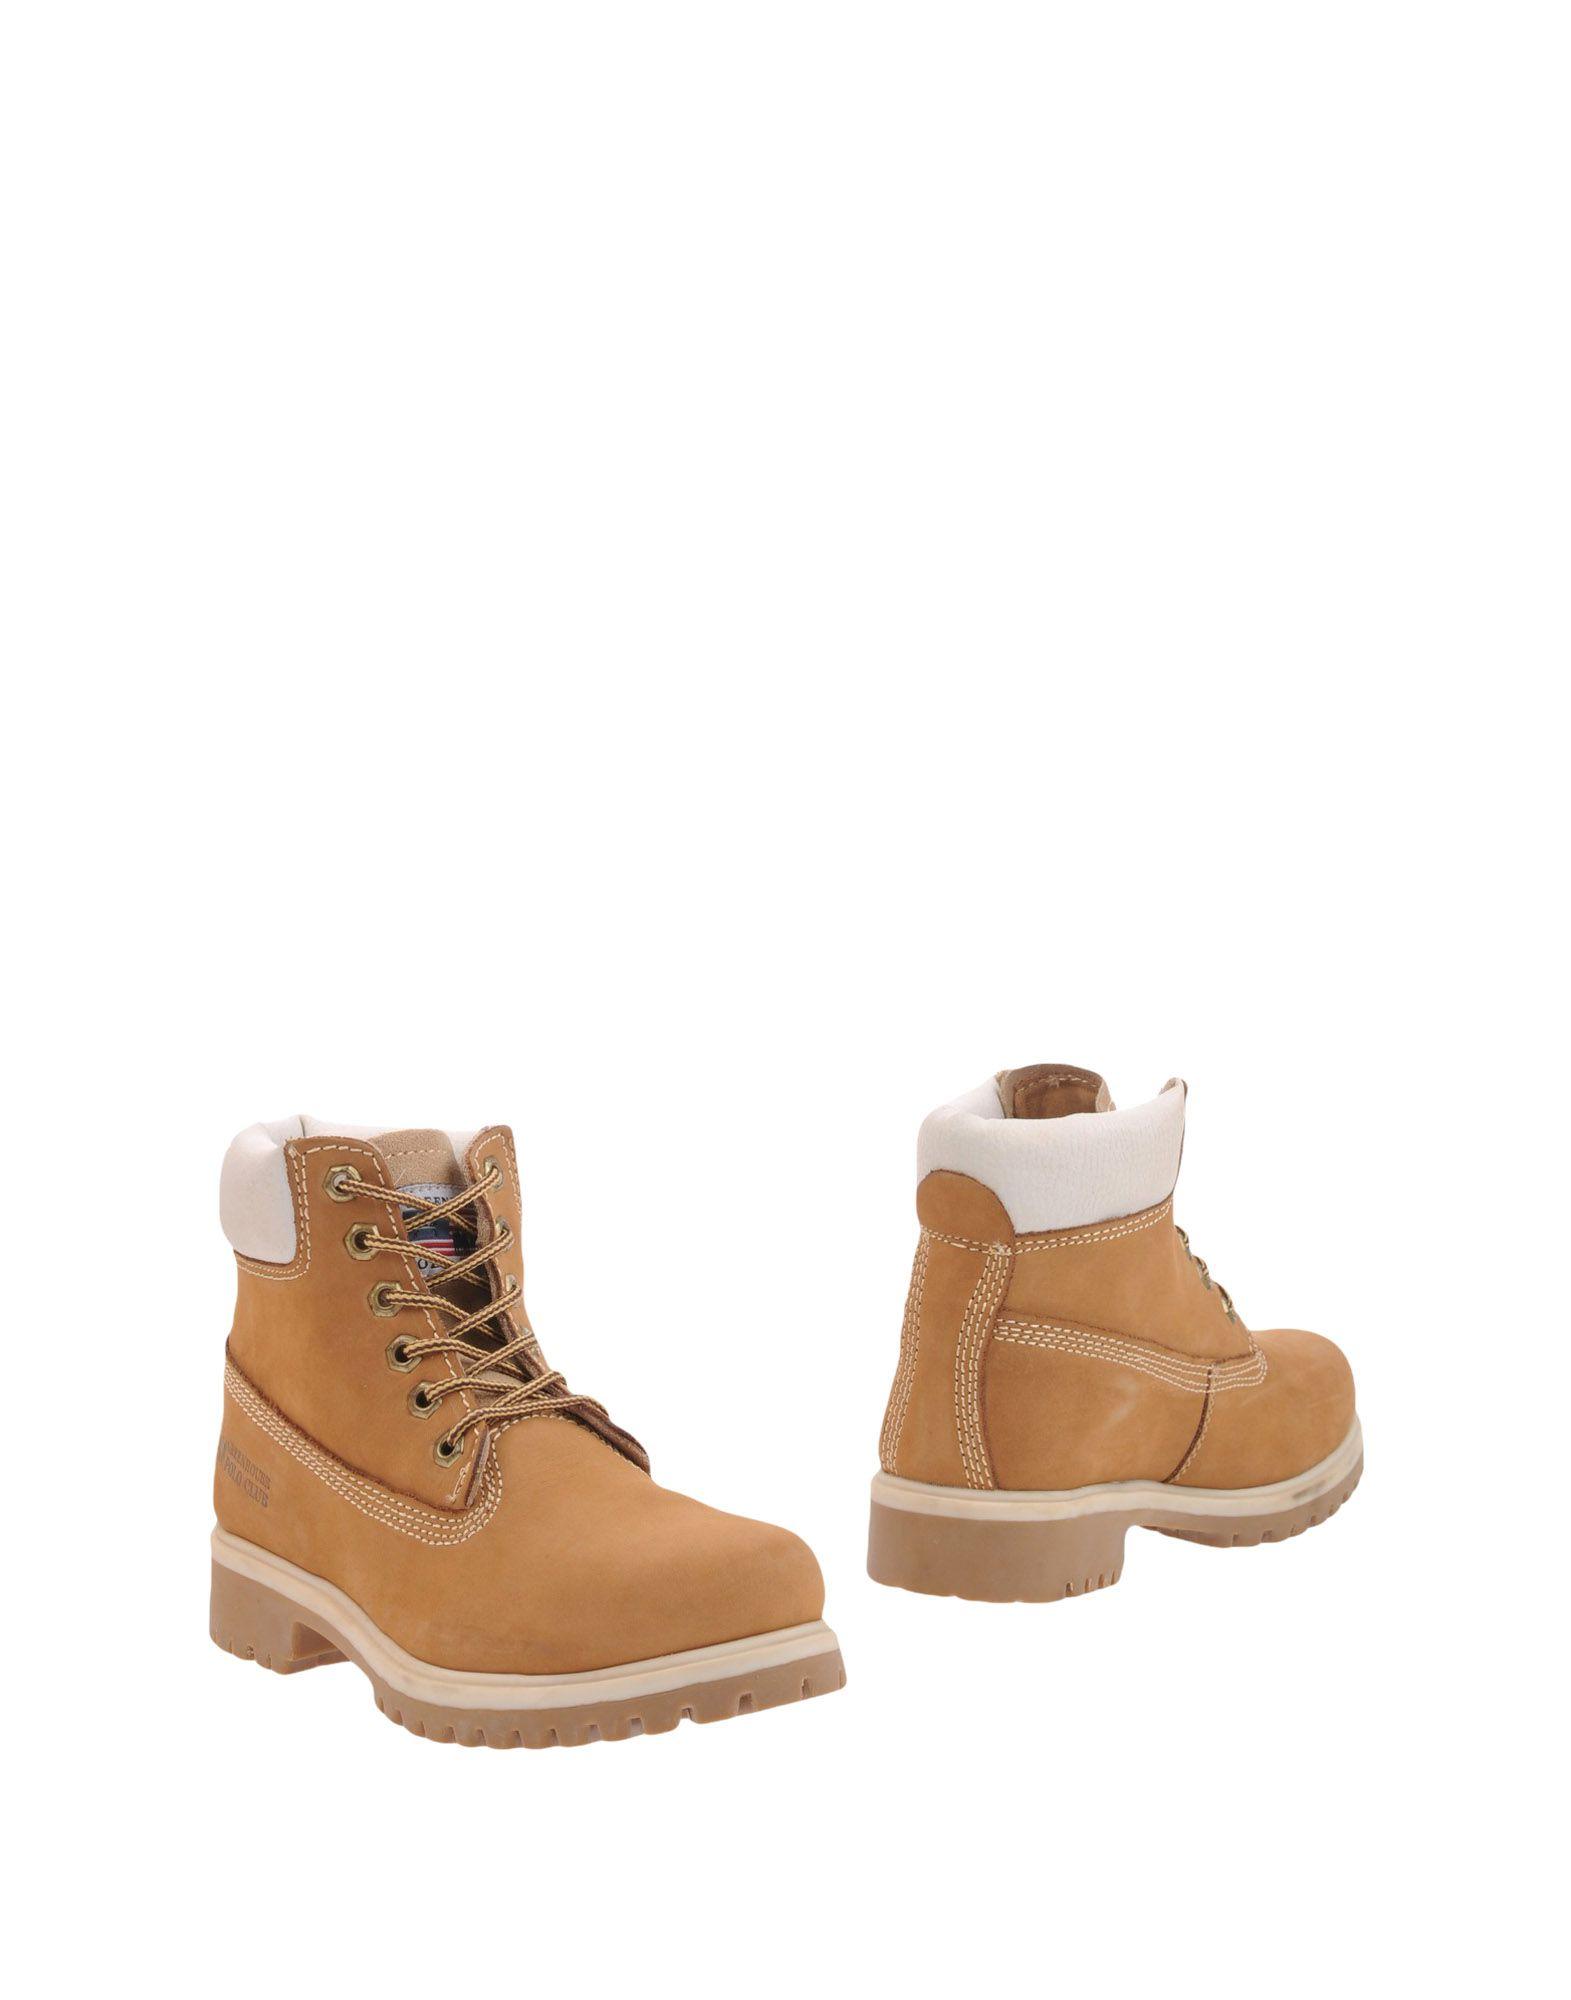 GREENHOUSE POLO CLUB Ankle Boots in Natural | Lyst UK